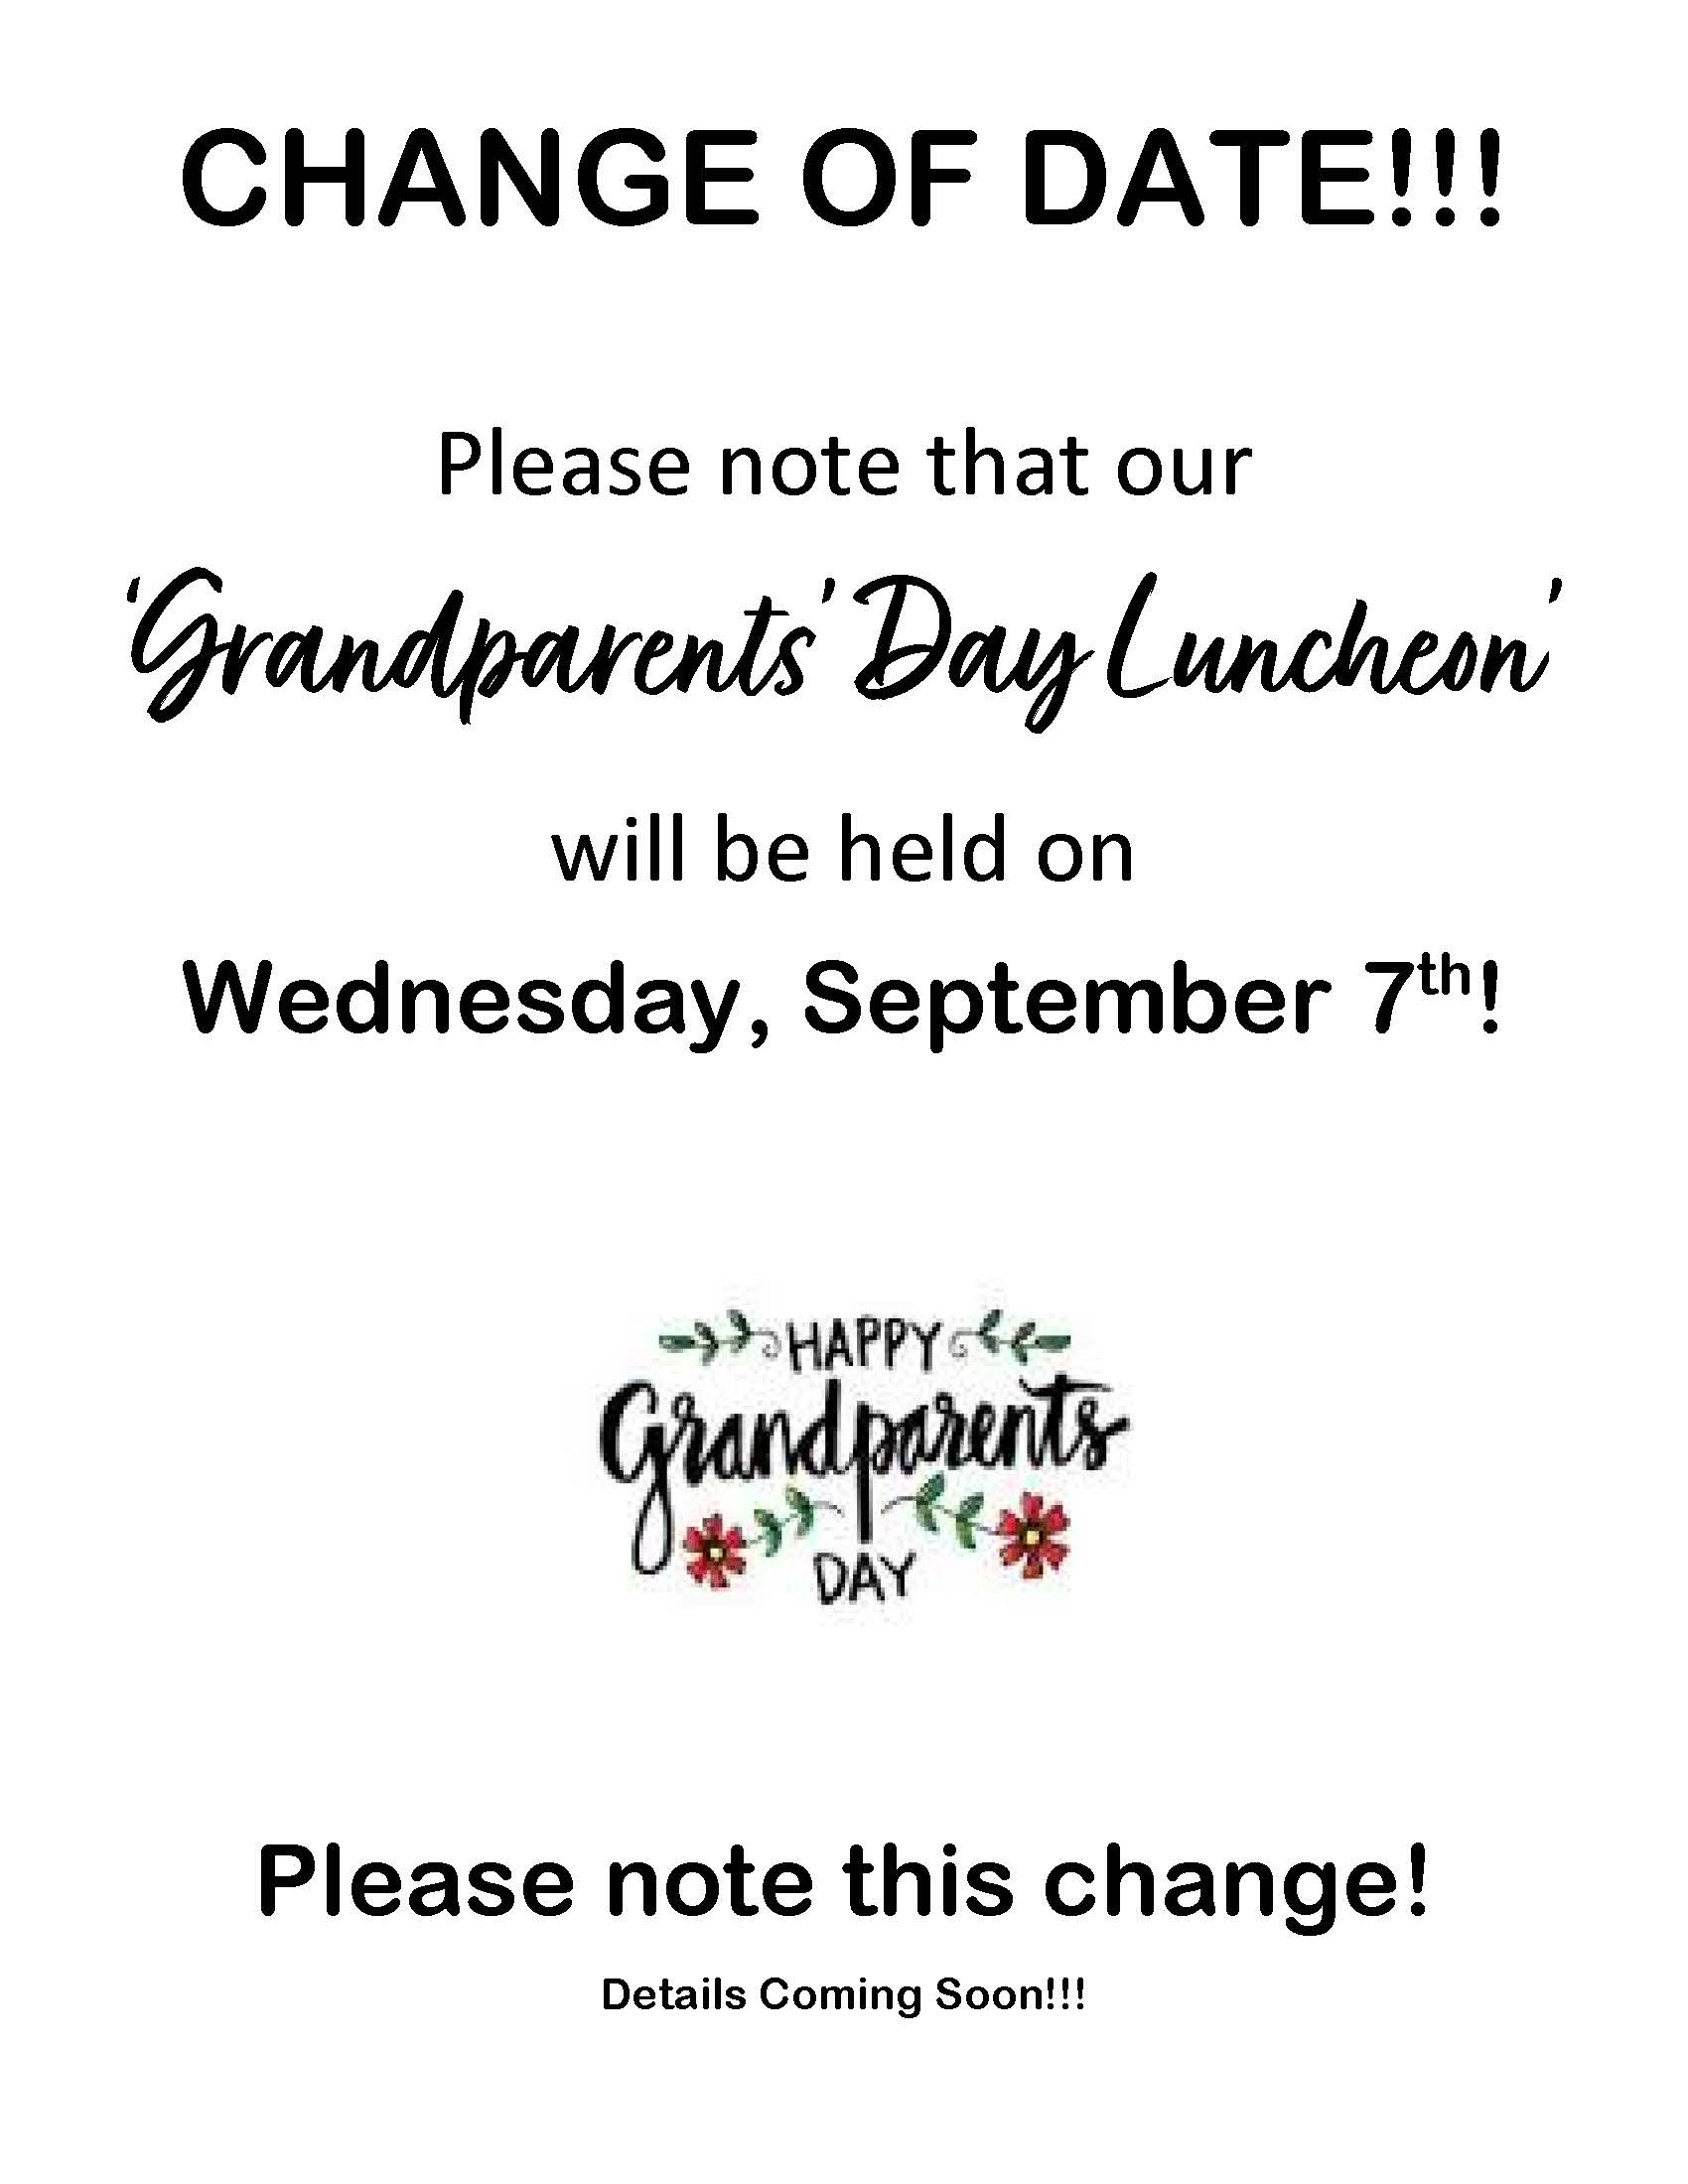 Grandparents Luncheon Change of Date